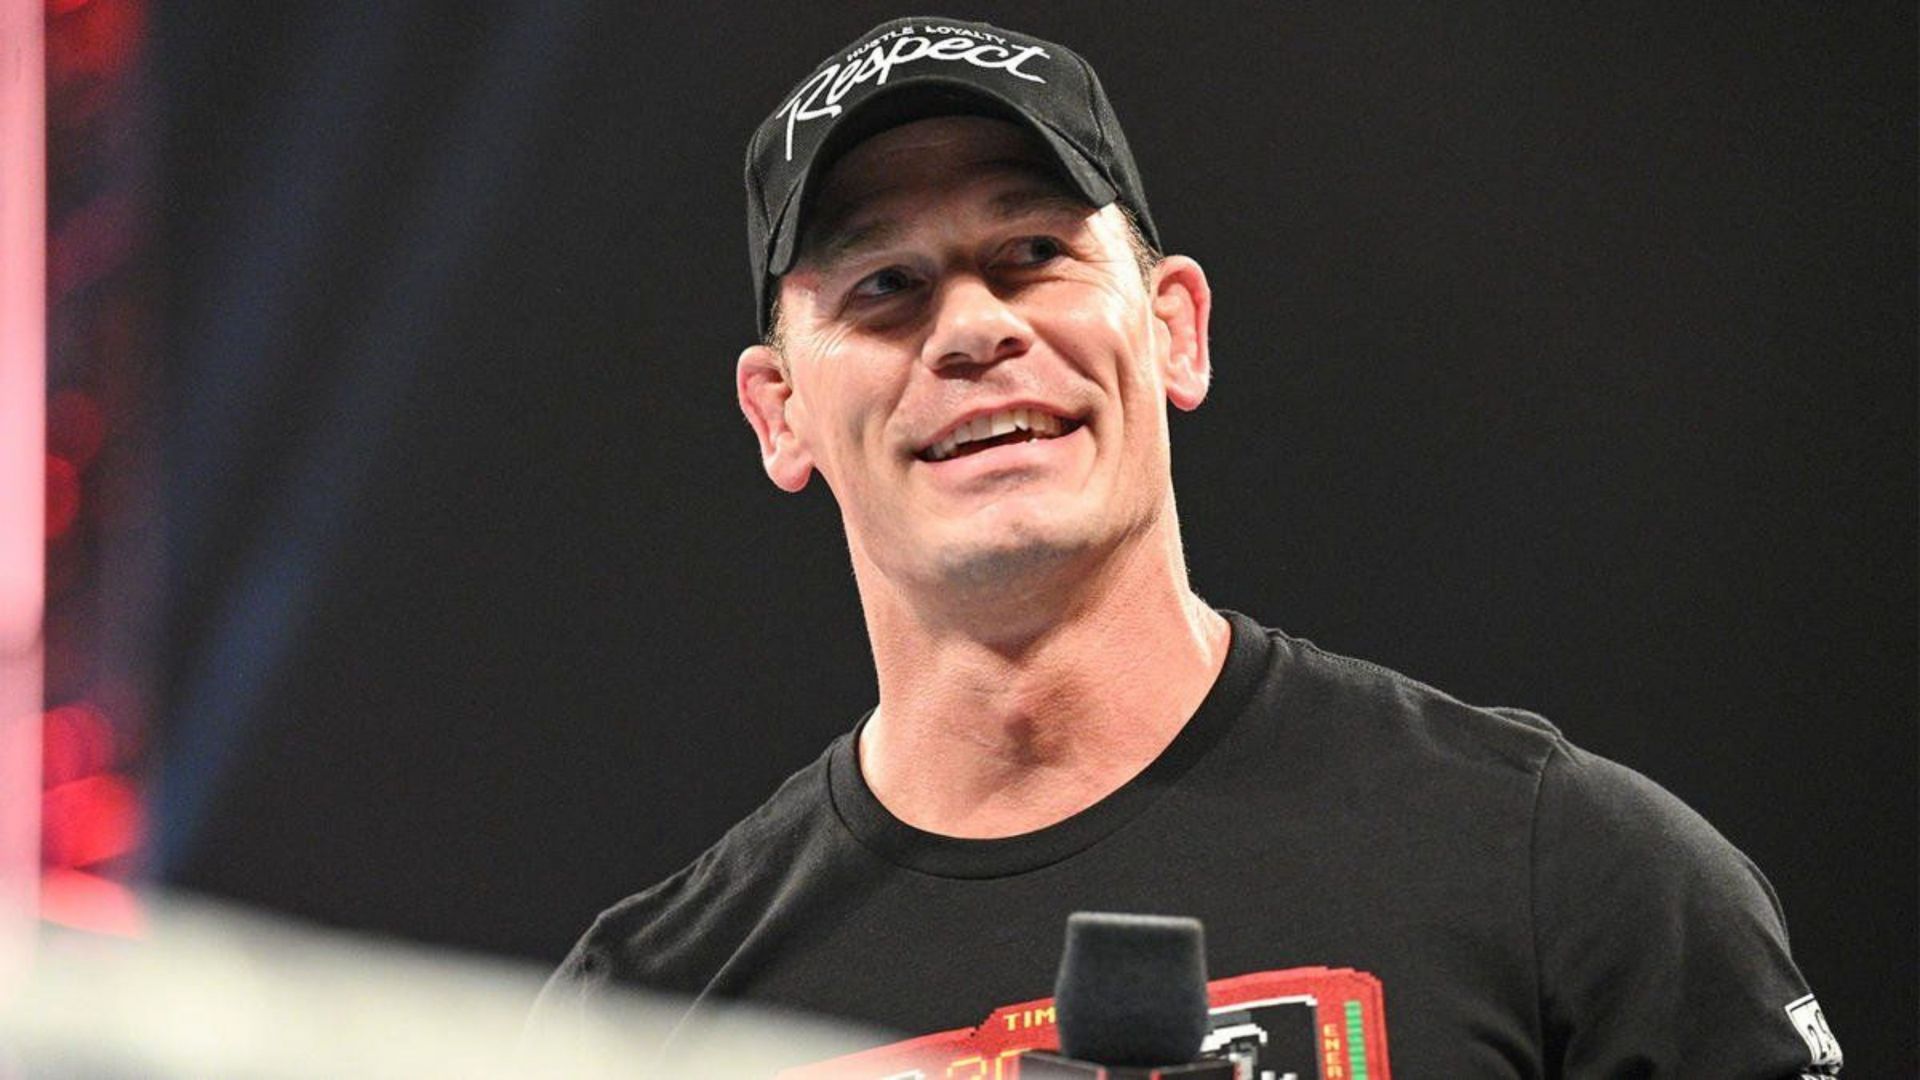 John Cena had to sleep in his car after moving to Los Angeles